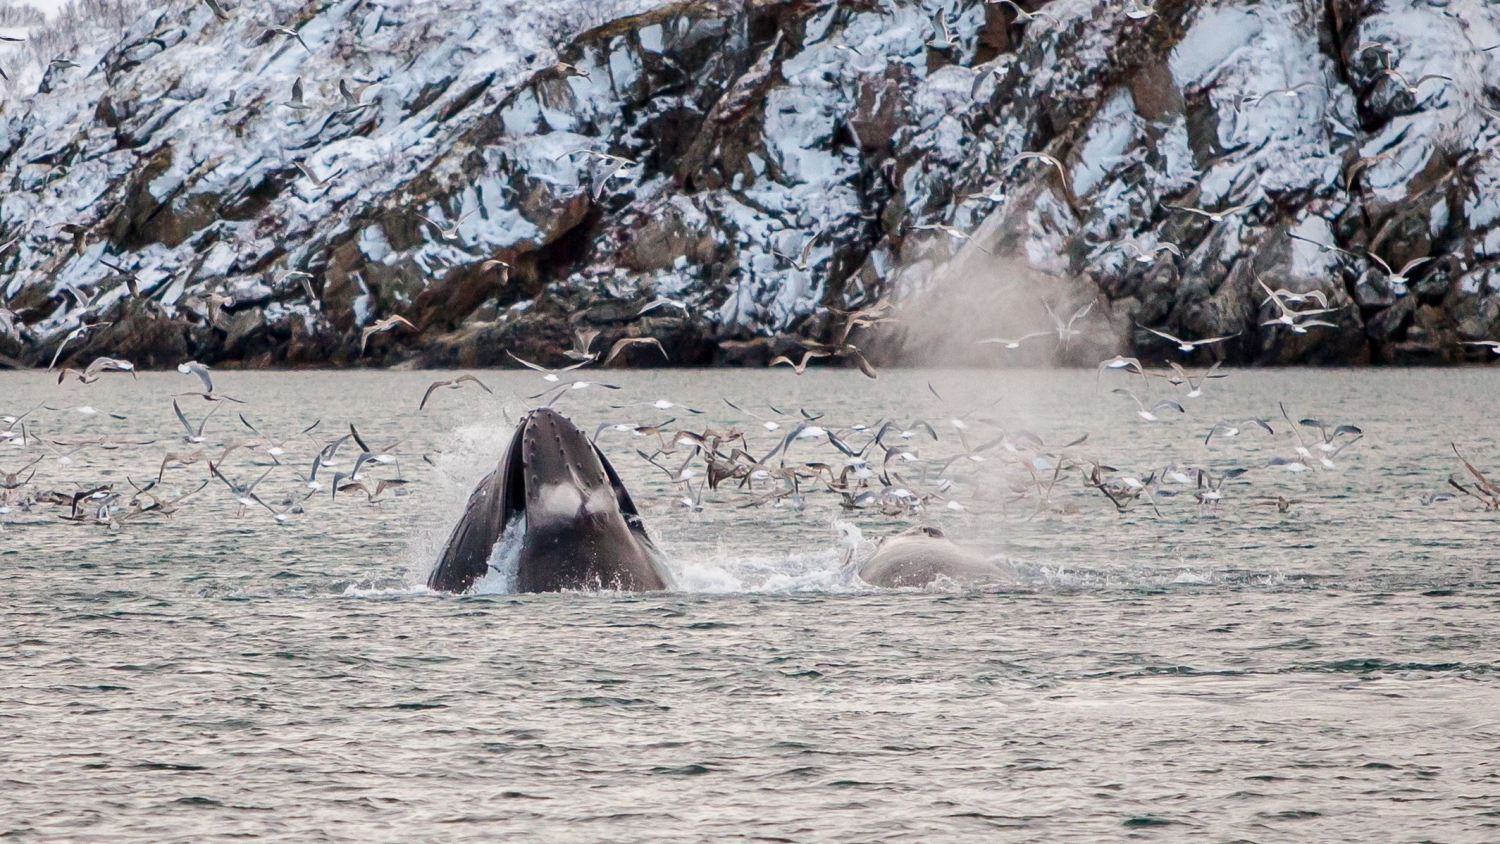 Humpback whale feeding, while birds wait for leftovers